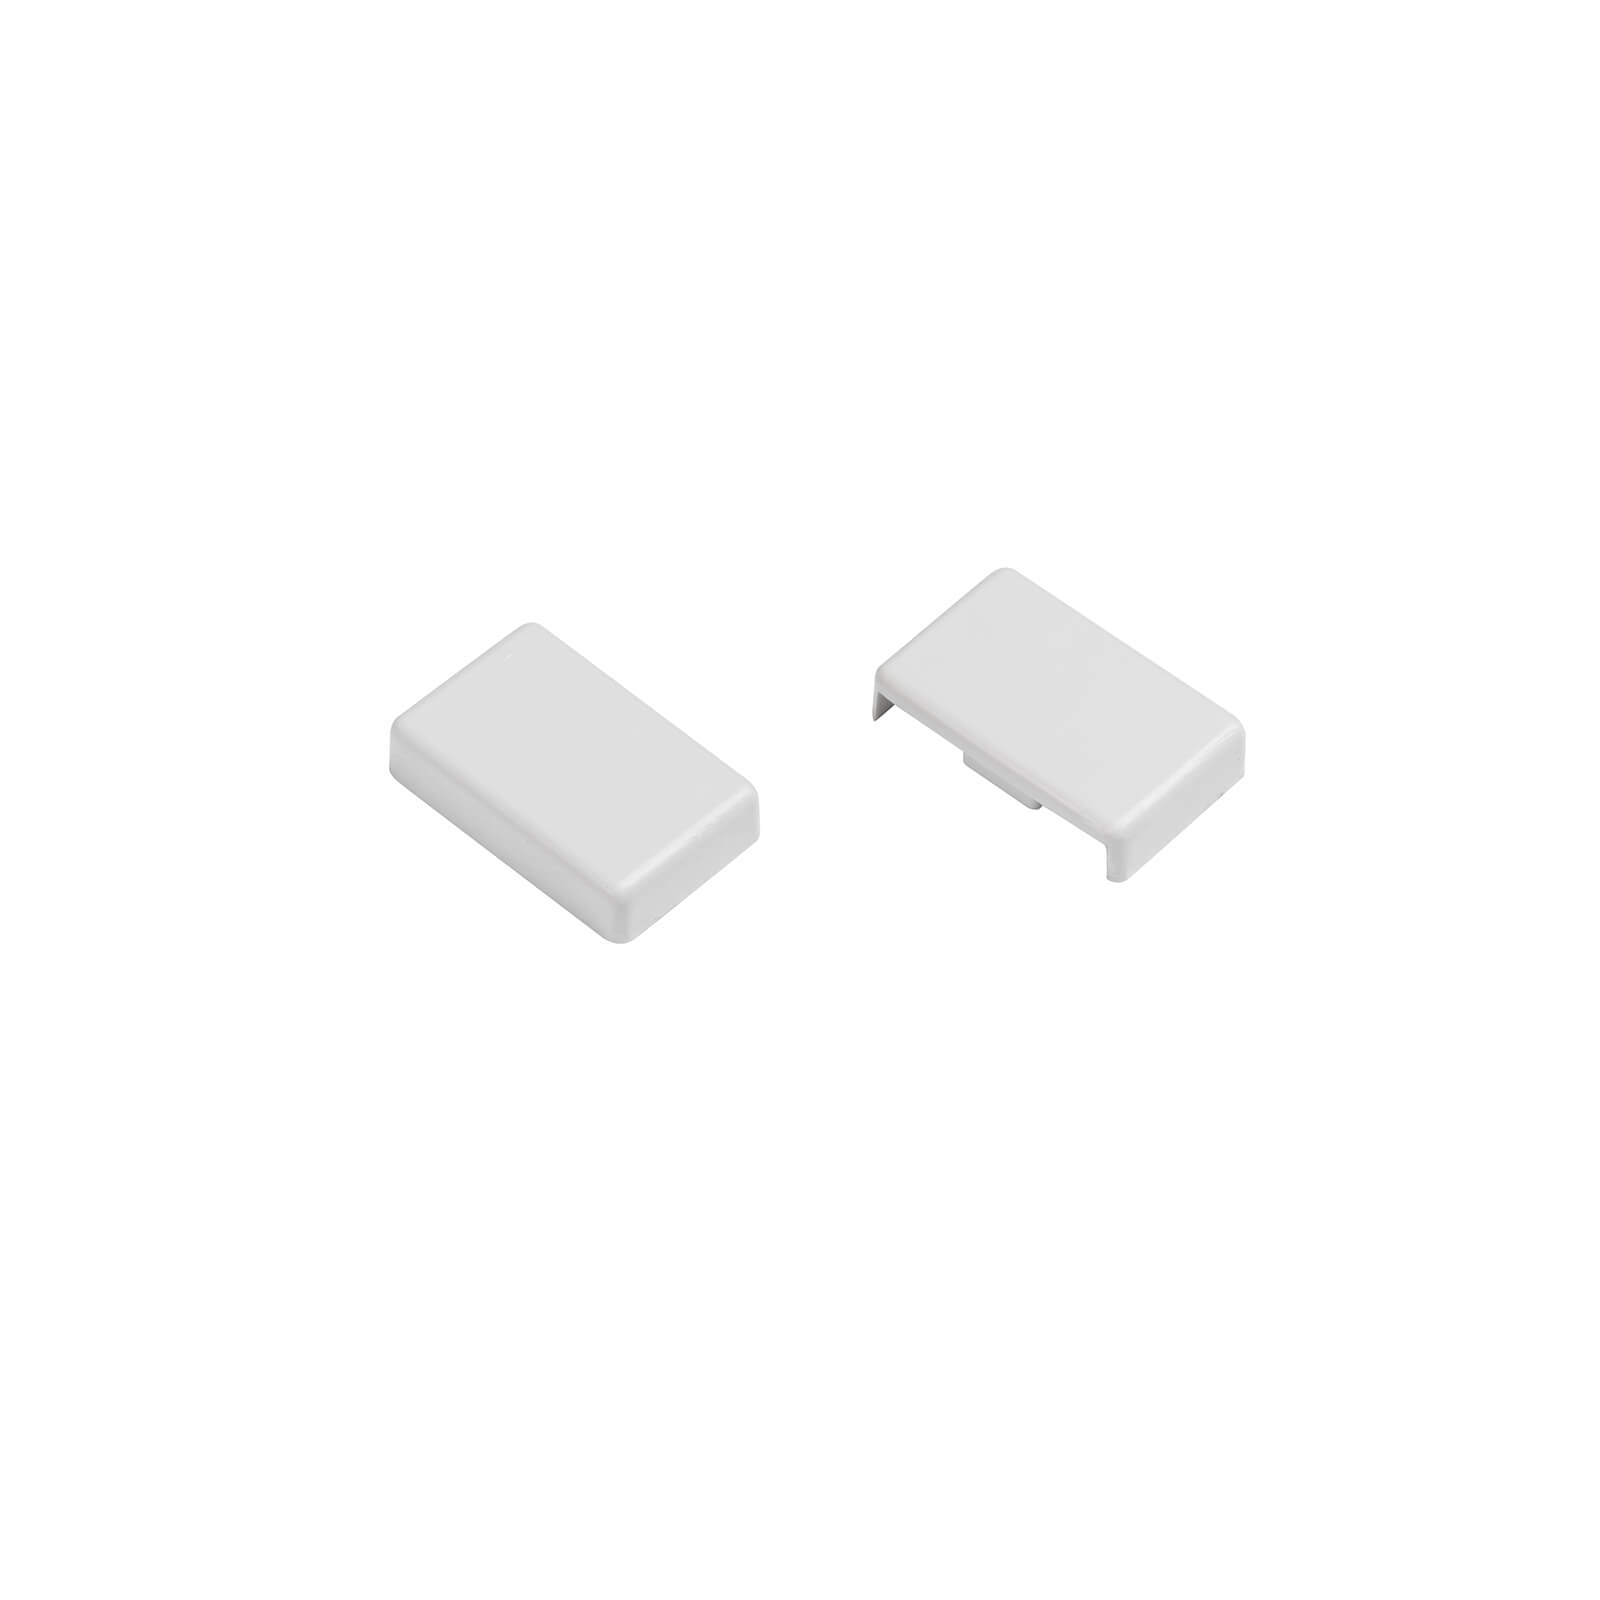 D-Line 25x16mm Trunking Clip-On End Cap 2 Pack - White